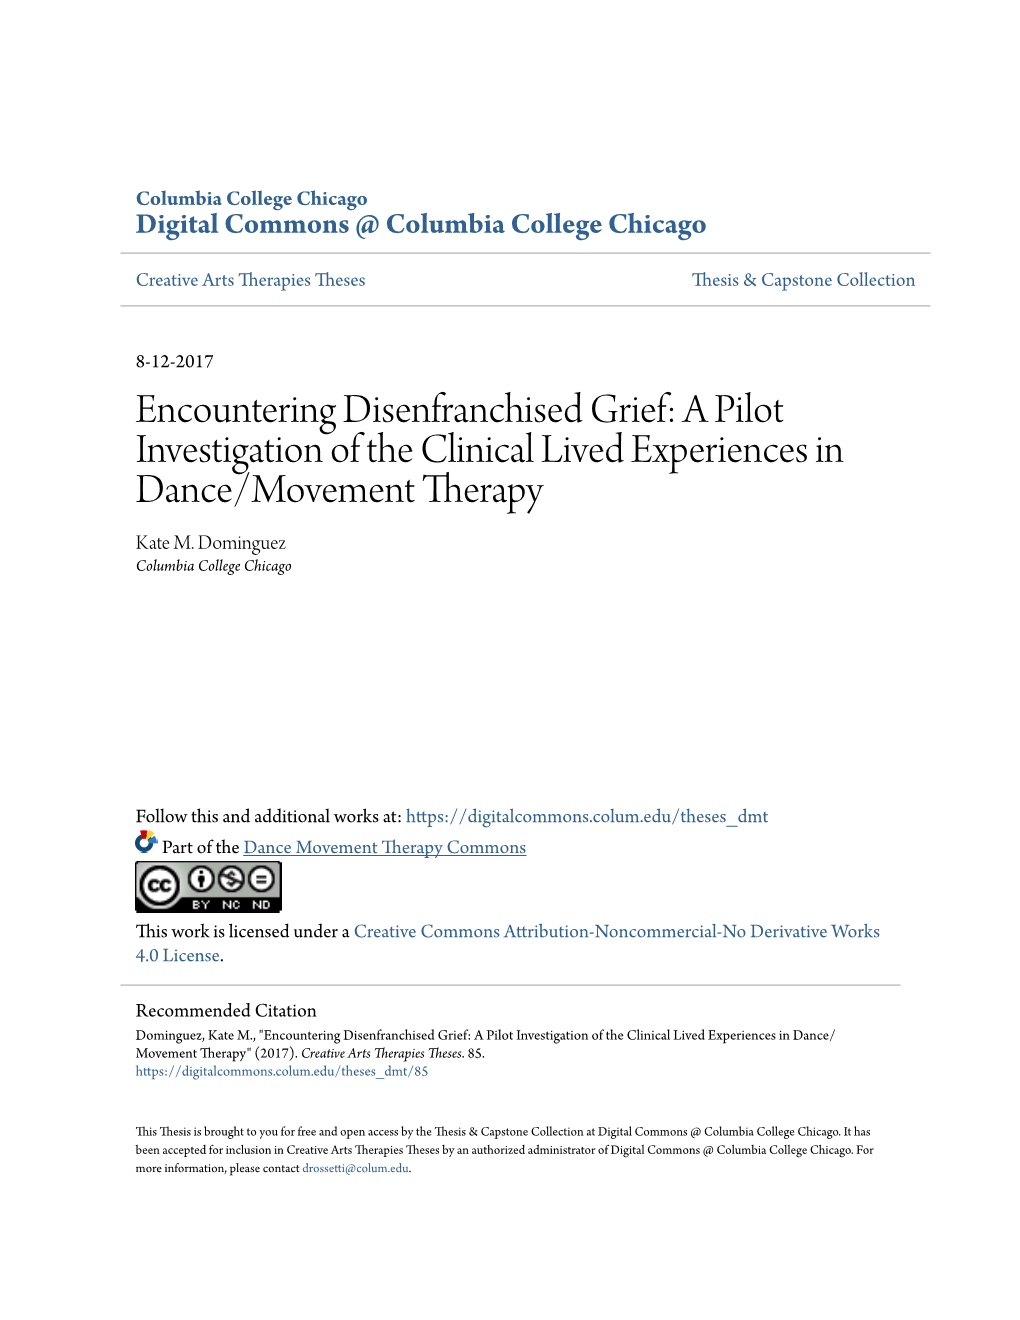 Encountering Disenfranchised Grief: a Pilot Investigation of the Clinical Lived Experiences in Dance/Movement Therapy Kate M